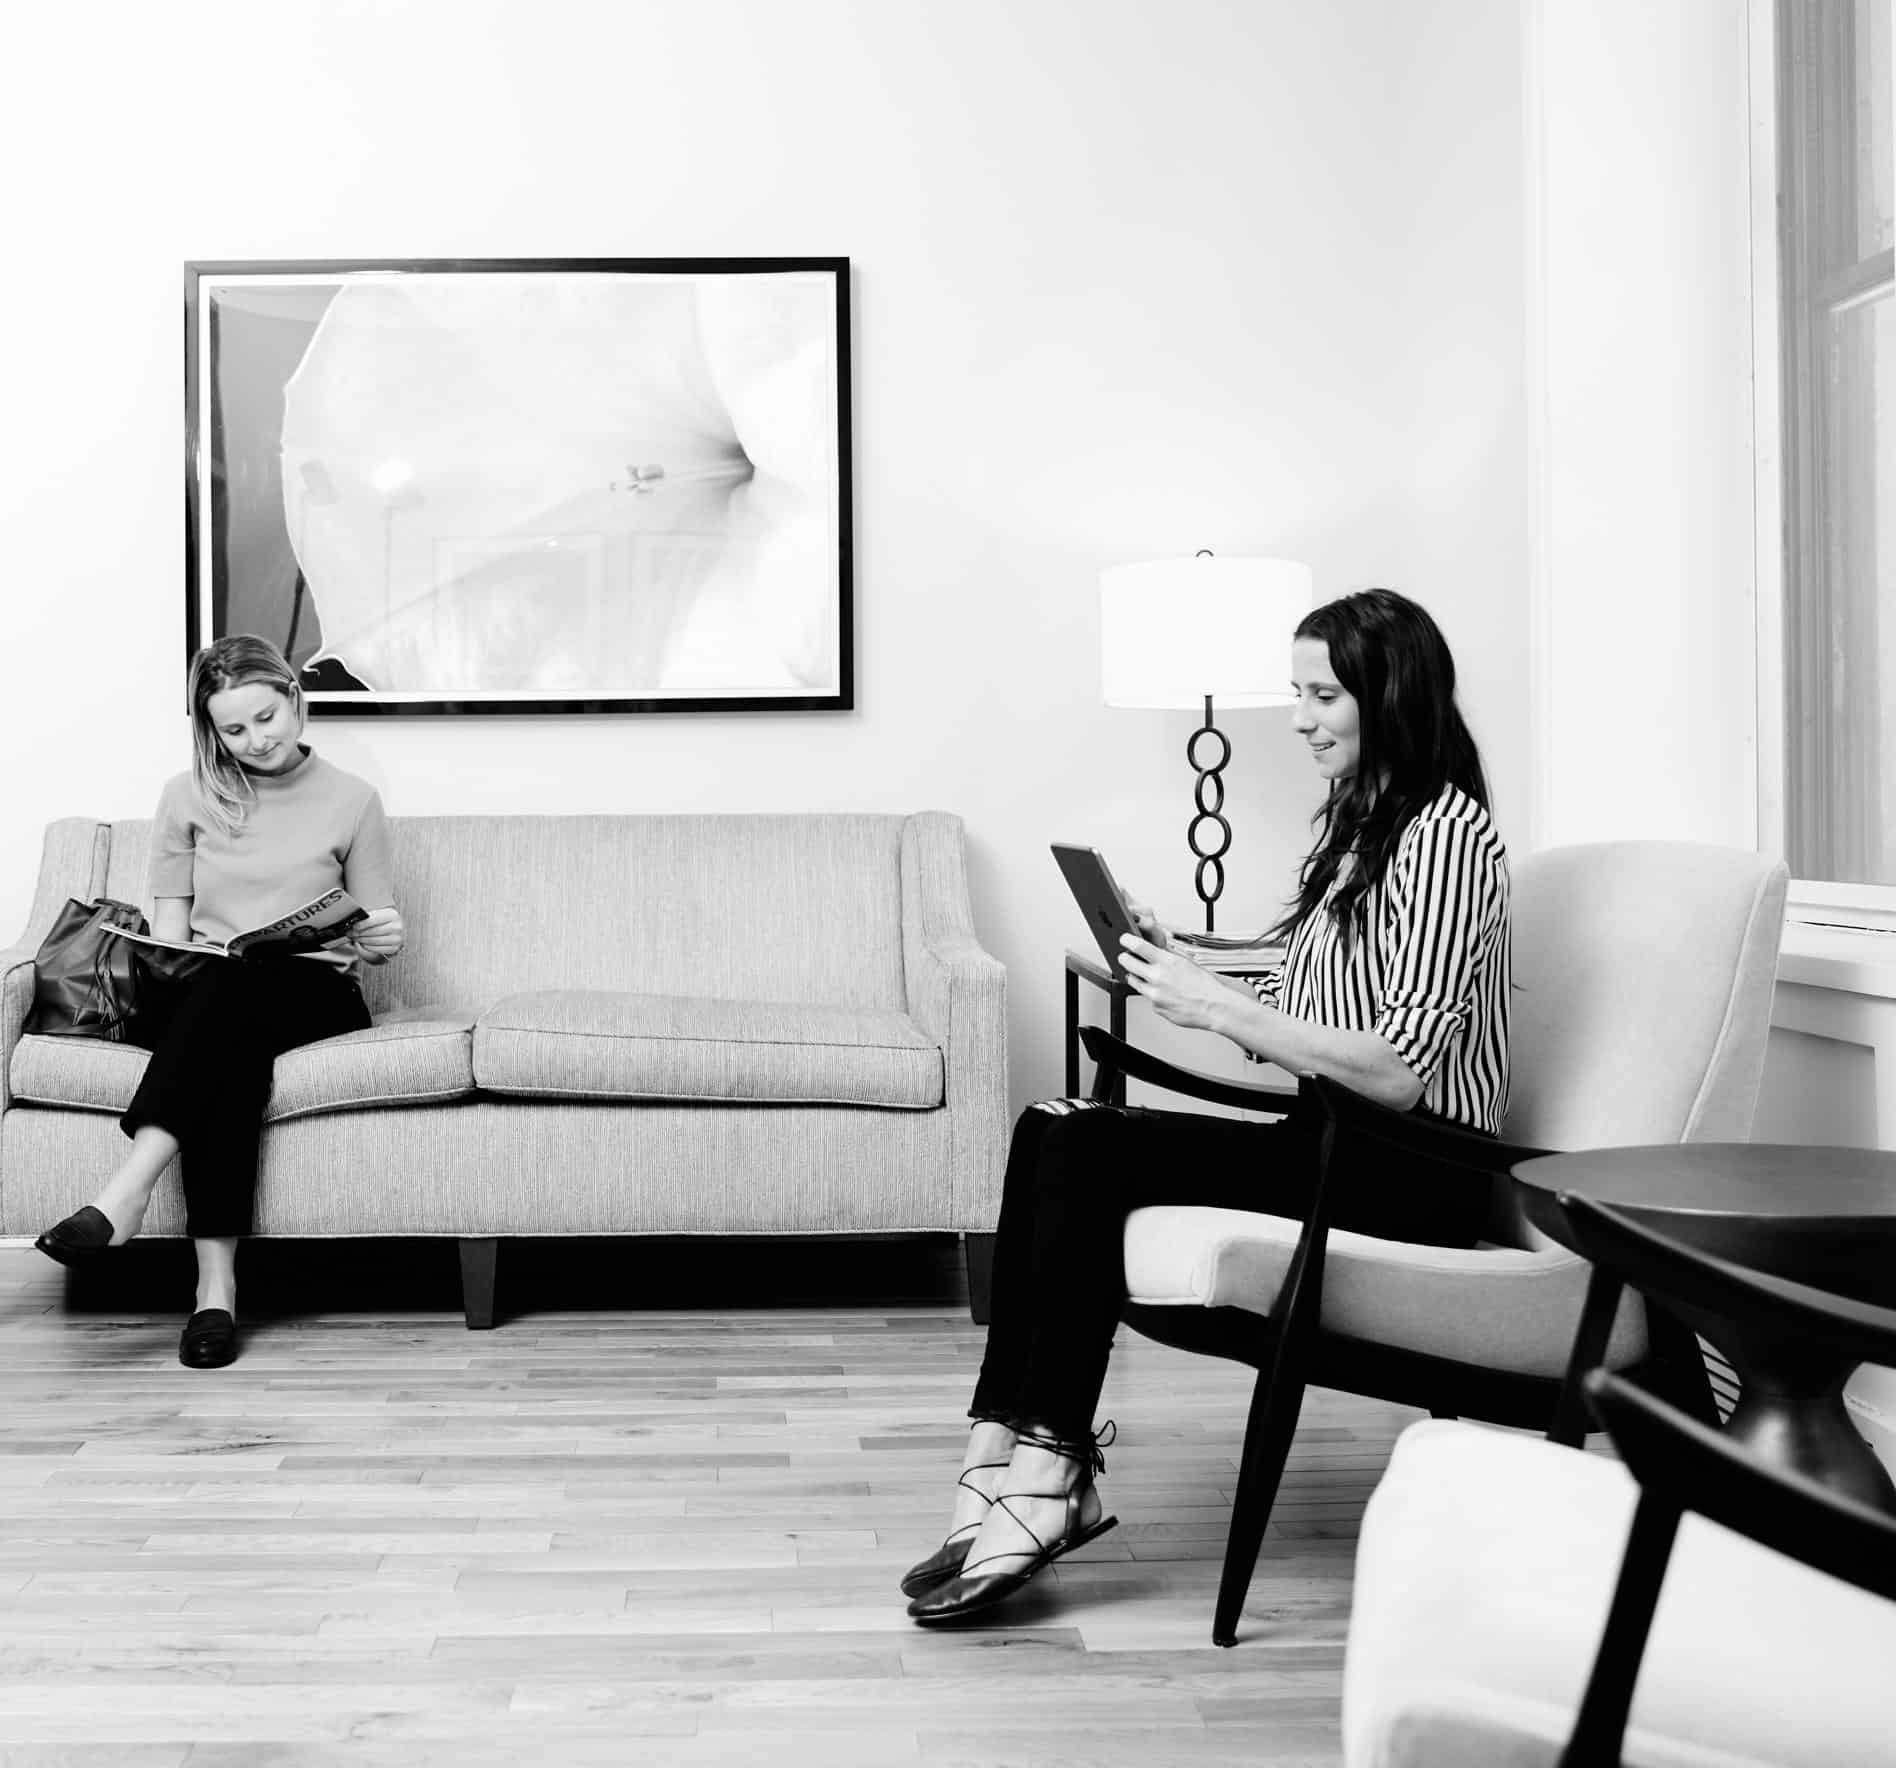 Our practice of capturing moments is showcased in this black and white photo of two women sitting in a room.